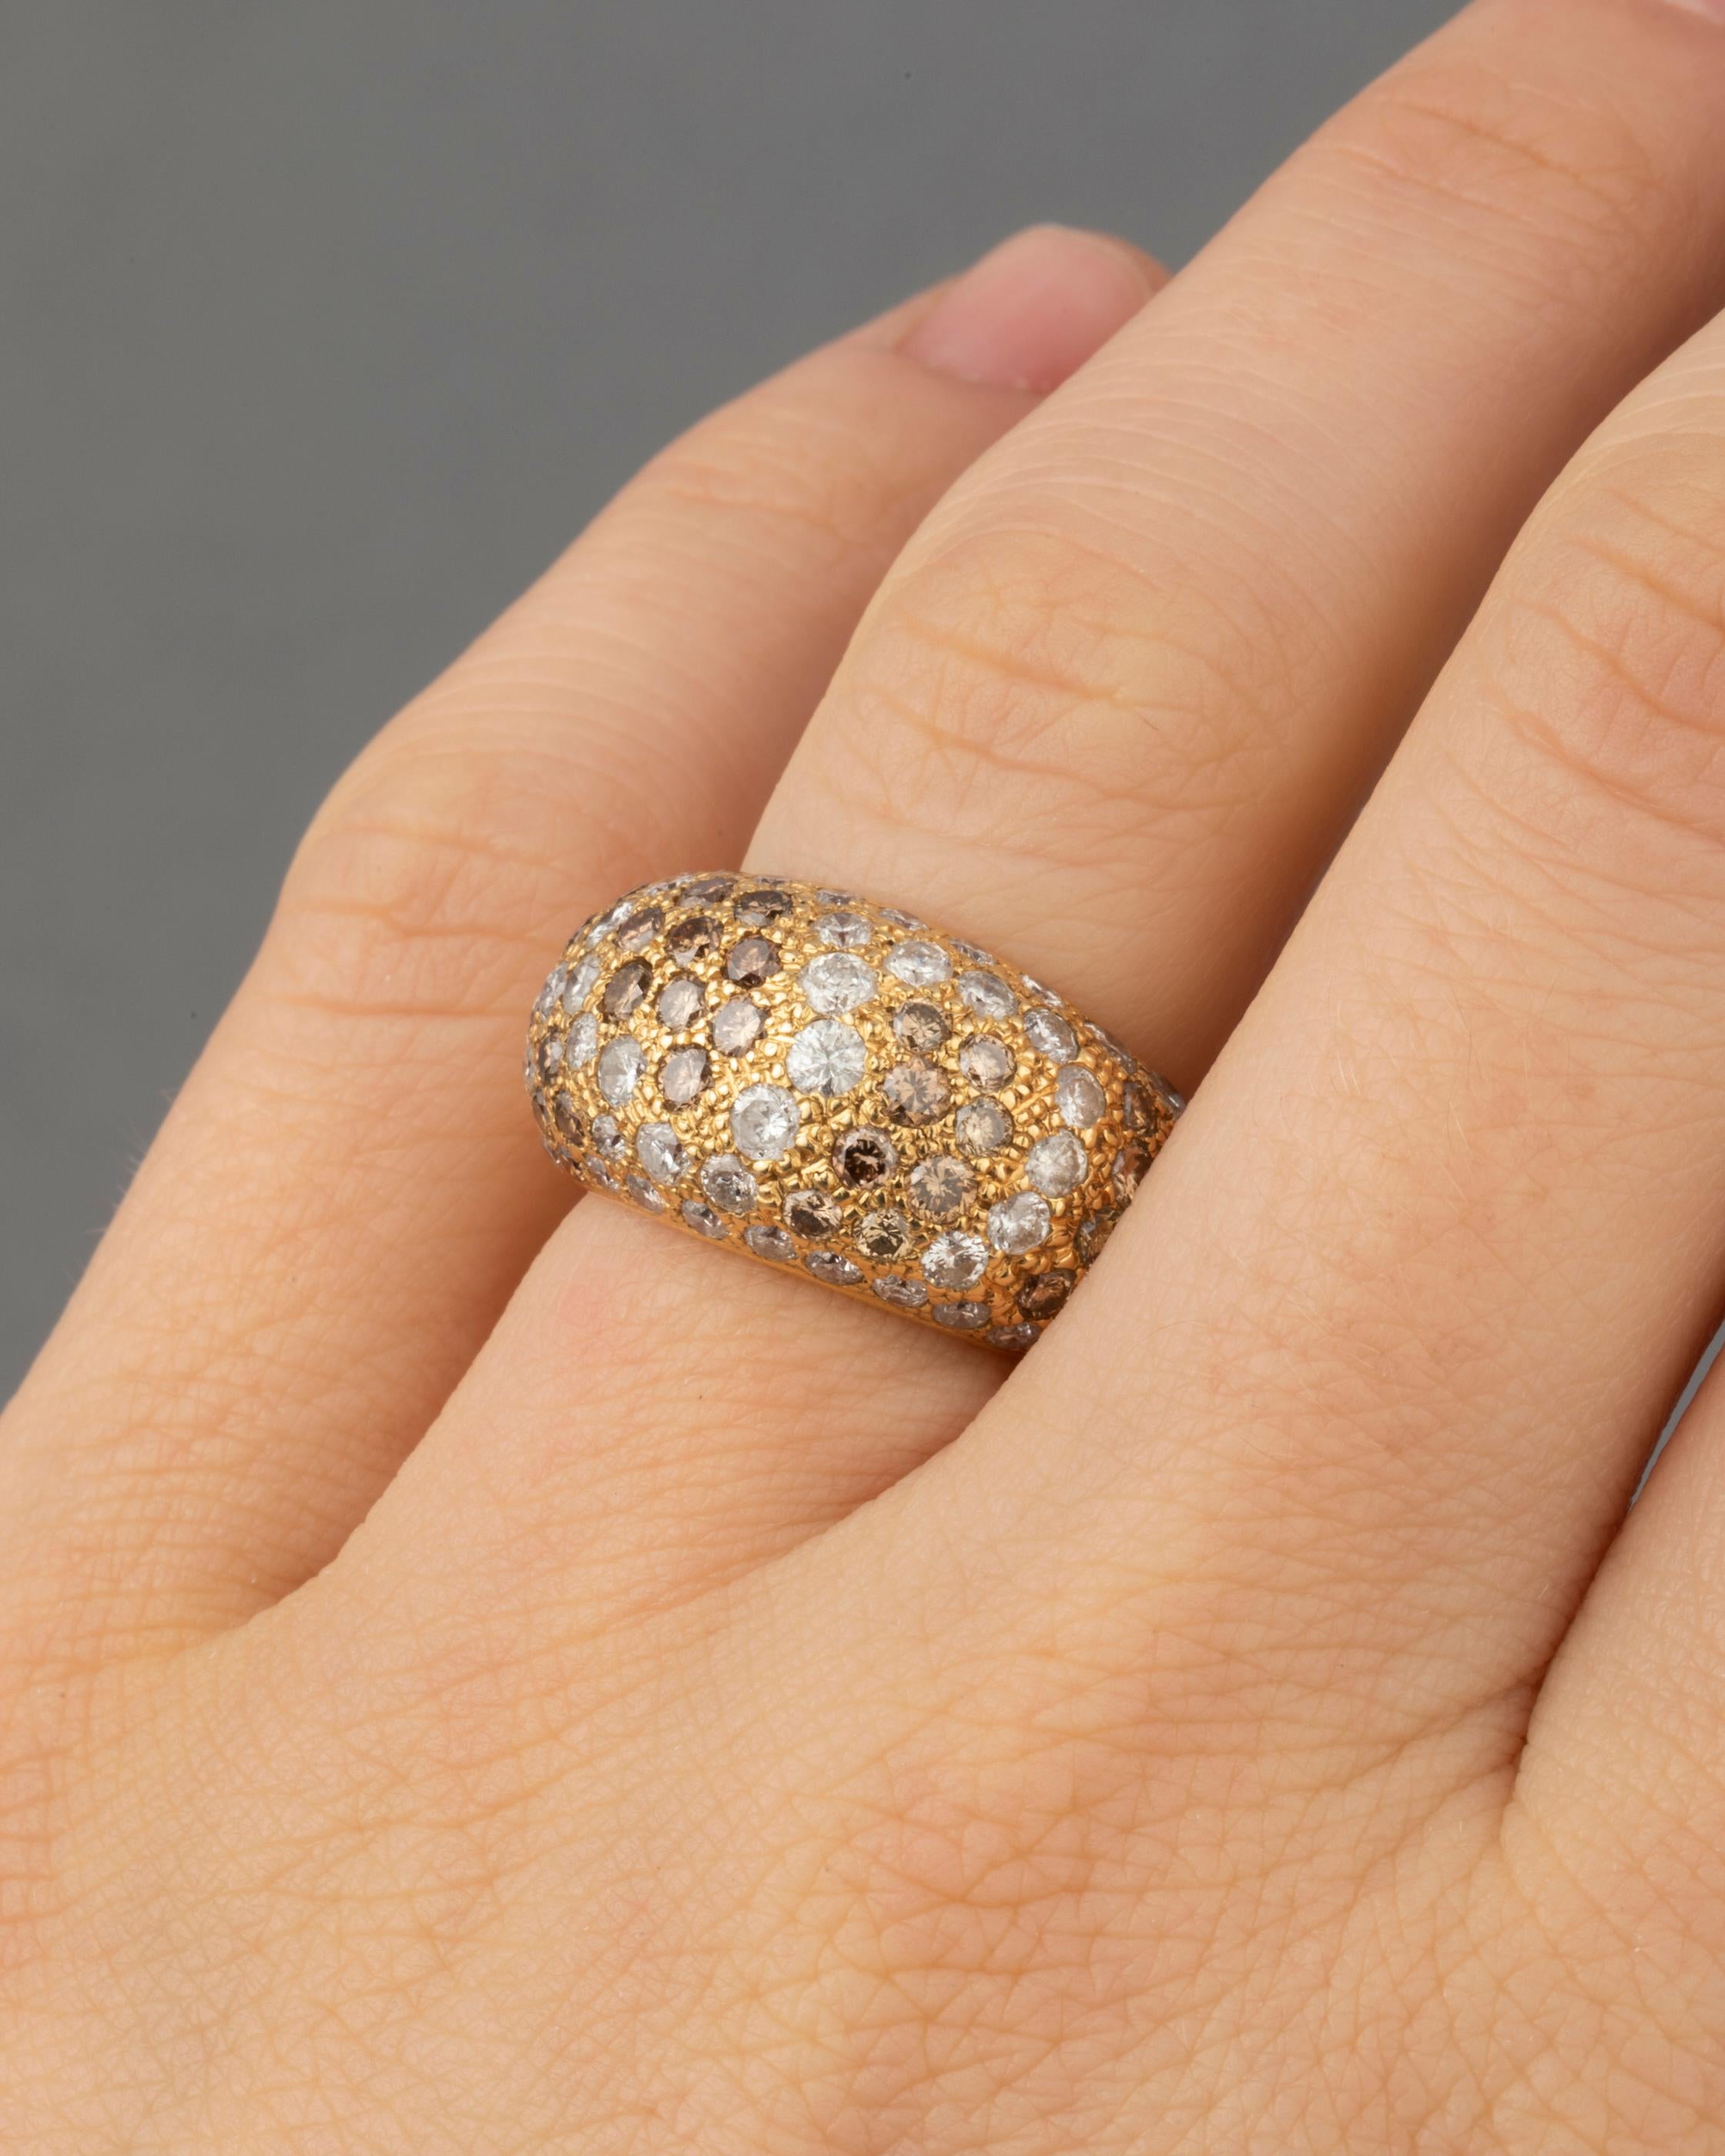 Beautiful Cartier Ring, made in 1999.
Yellow gold 18k.
3 carats of diamonds.
Ring size 50 or 5.25 USA.
Signed with numbers and year.
12.10 grams

